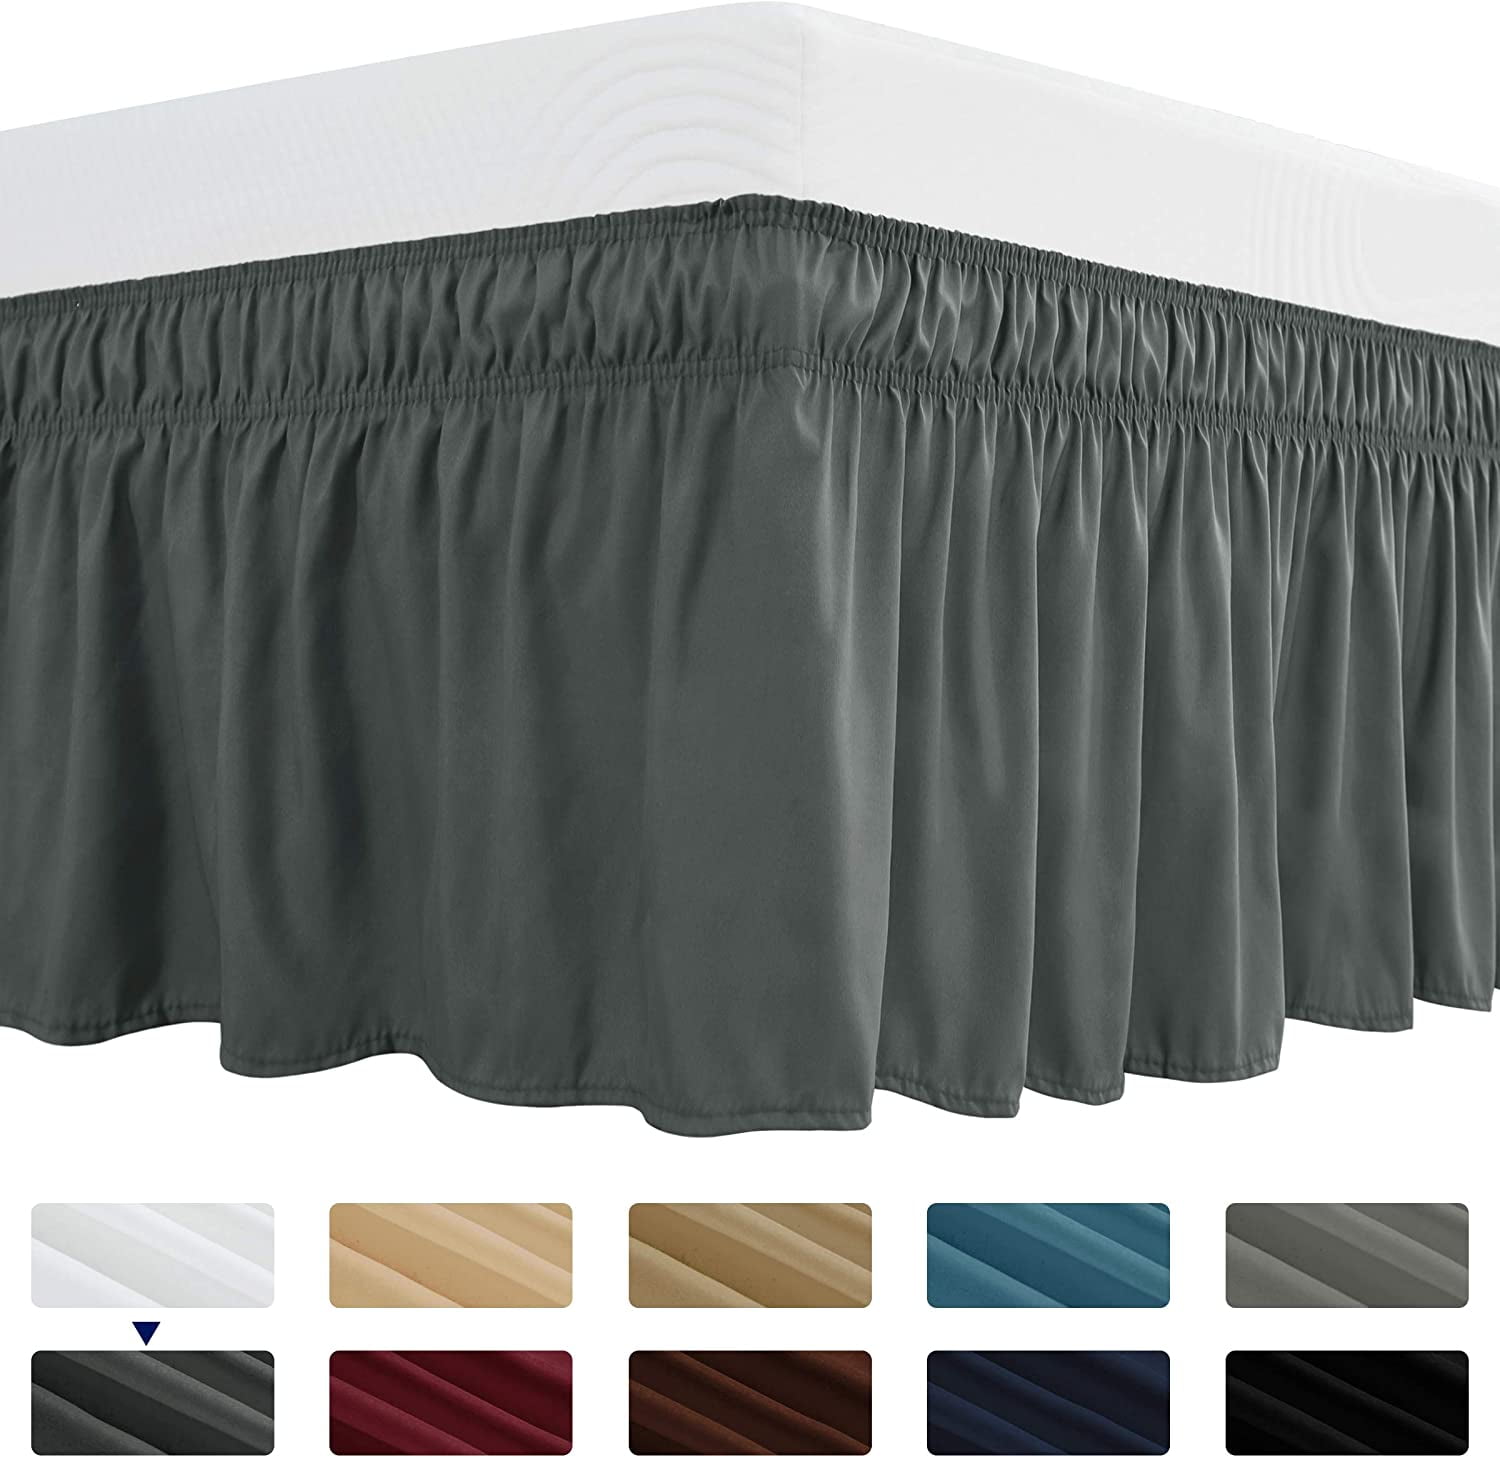 Subrtex Easy Fit Dust Ruffle Wrap, Queen Silver Bed Skirt